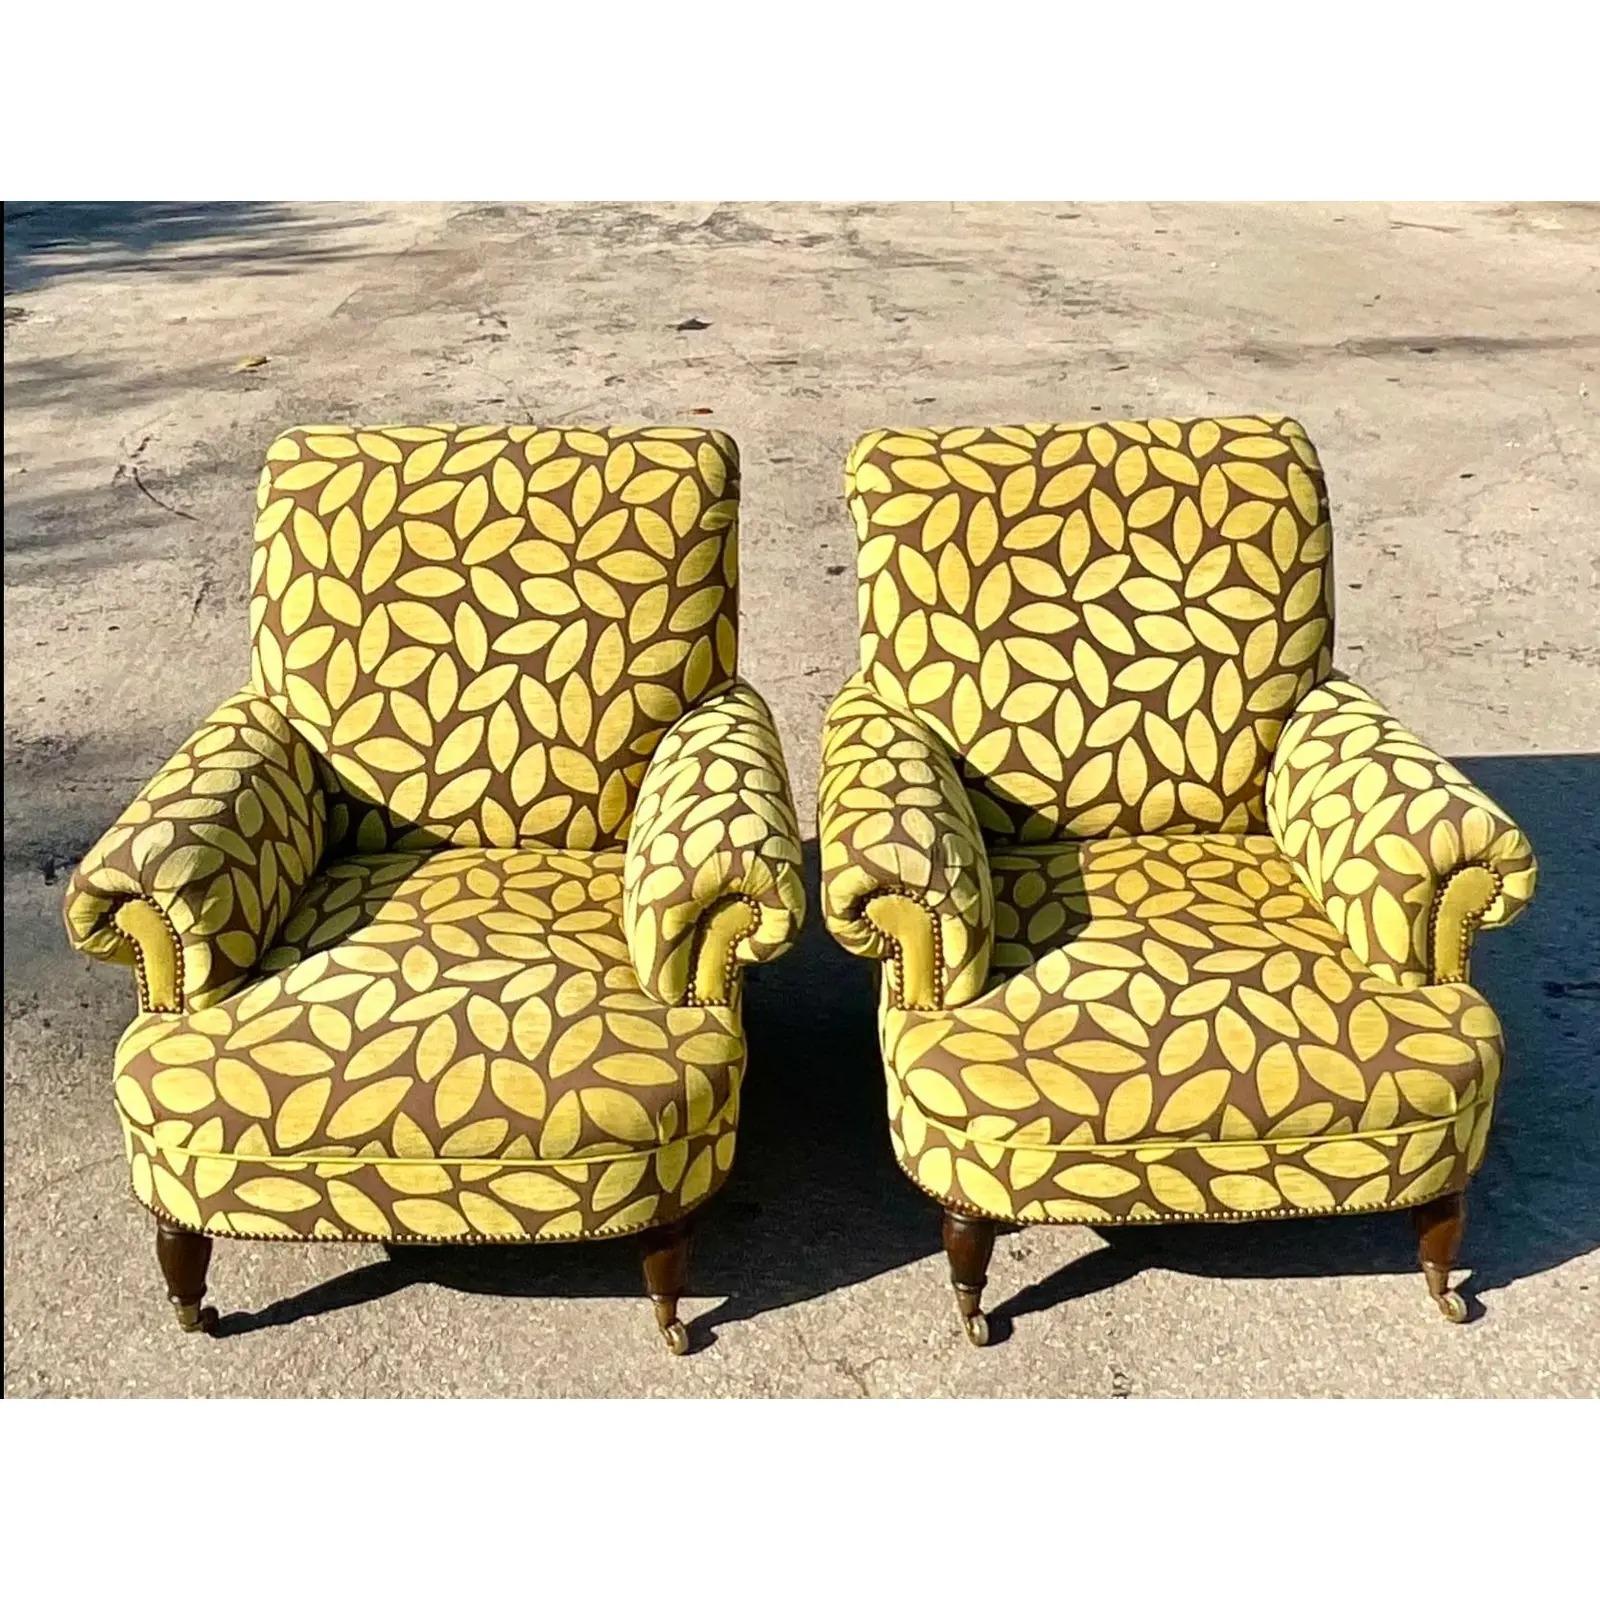 Fantastic pair of vintage boho lounge chairs. Beautiful cut velvet in a floating leaf design. A classic roll arm shape with turned legs on casters. Acquired from a Palm Beach estate.